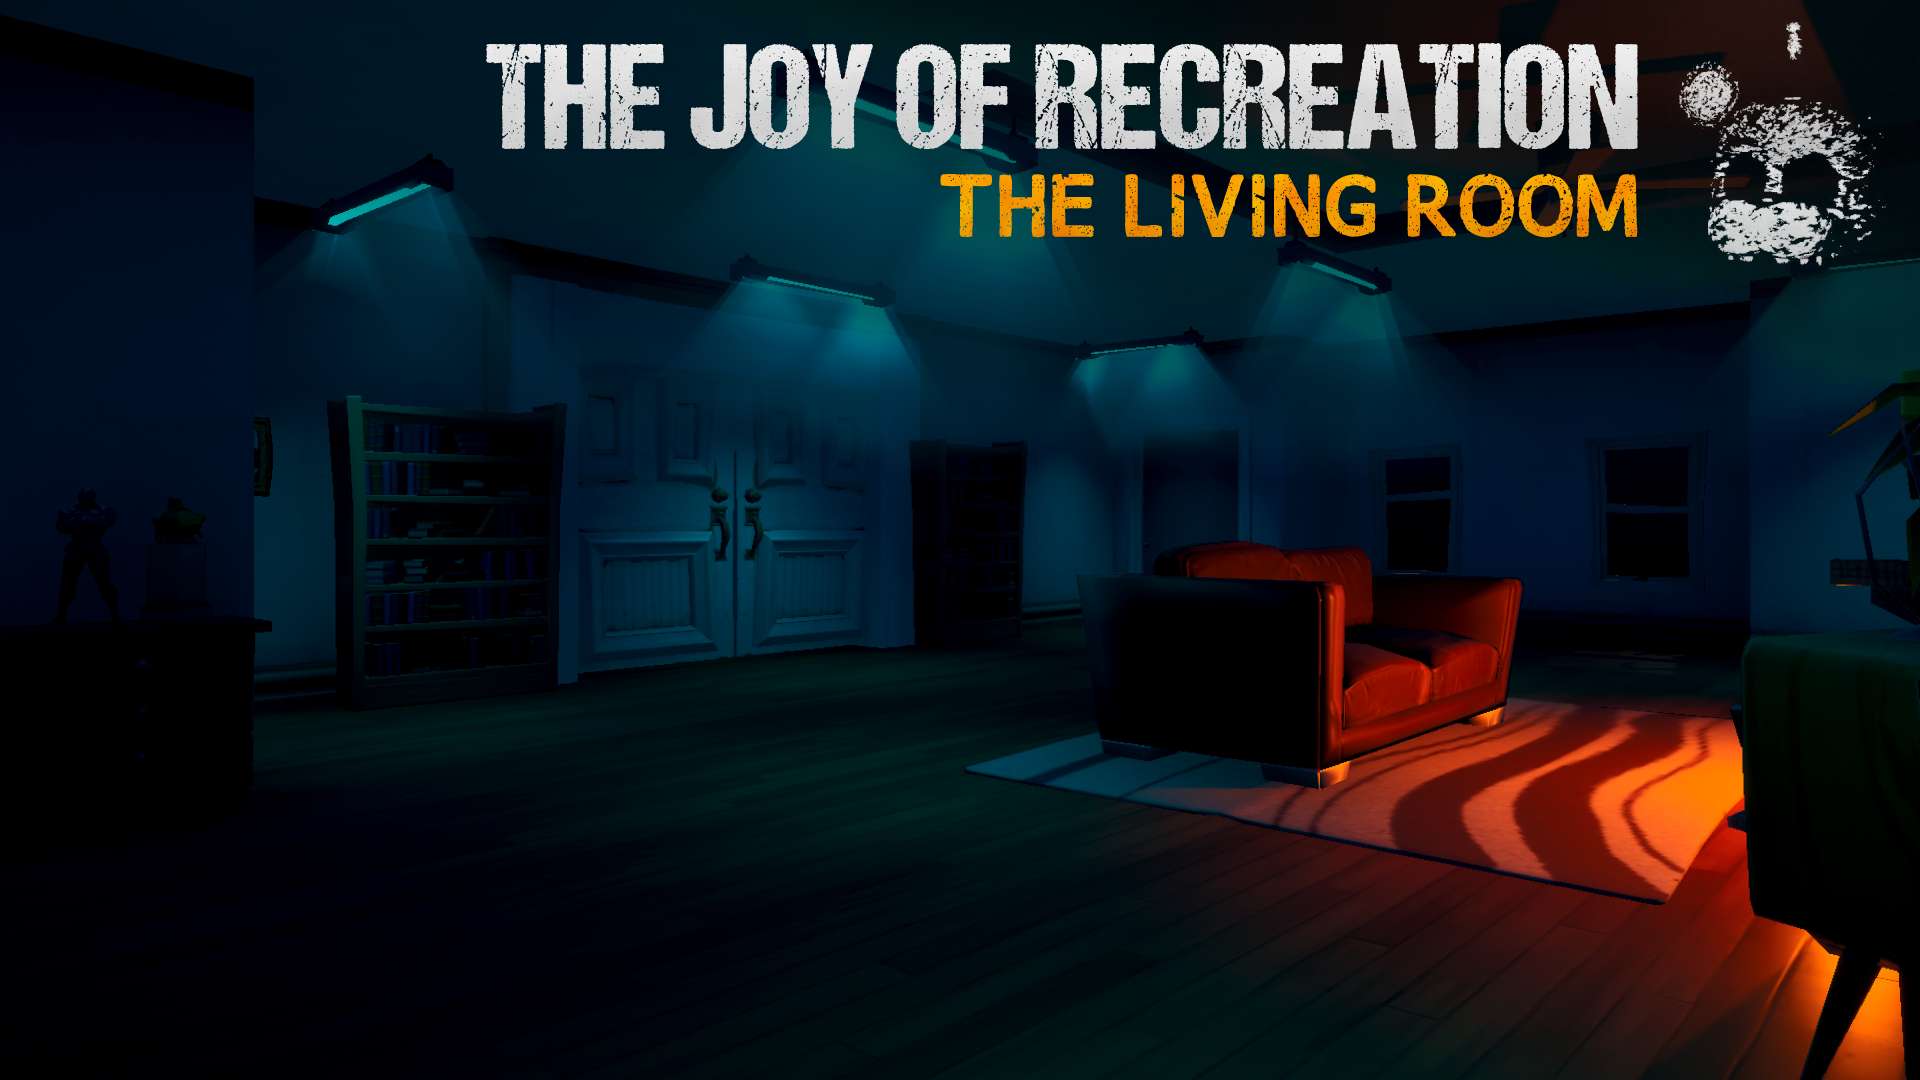 The Joy of Recreation: The Living Room